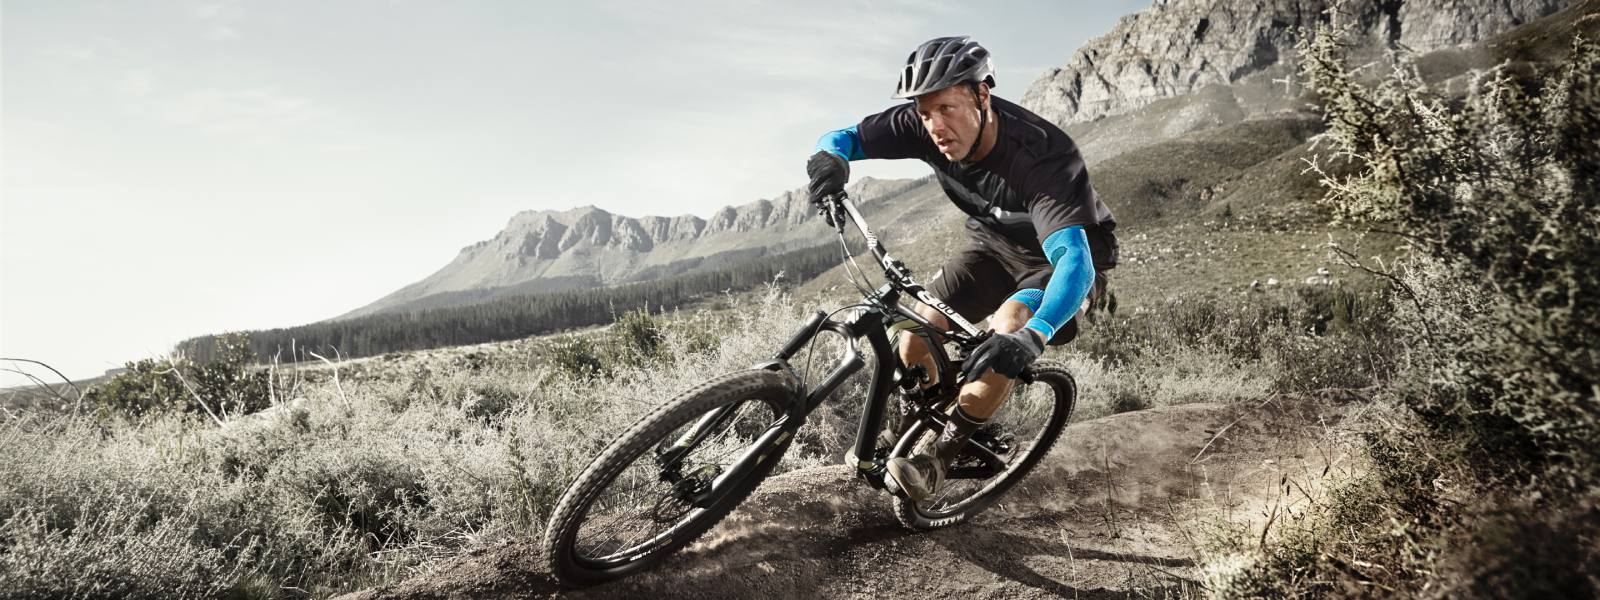 Mountain biker drives down a slope and wears blue arm sleeves